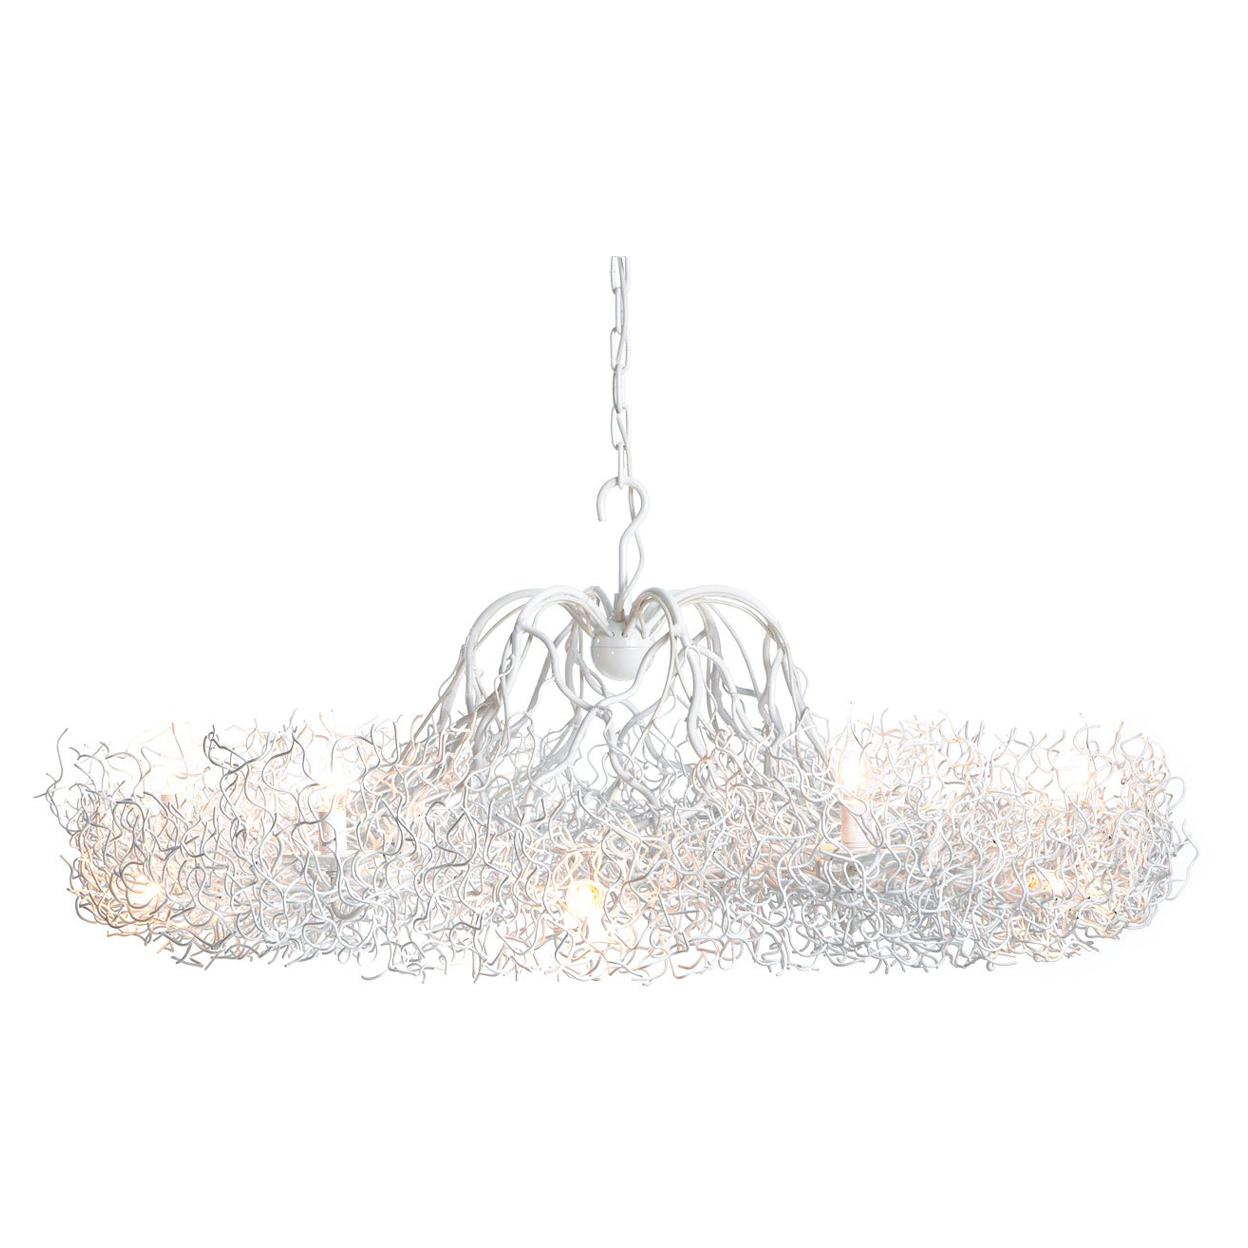 Modern Chandelier in a White Finish, Hollywood Collection, by Brand van Egmond For Sale